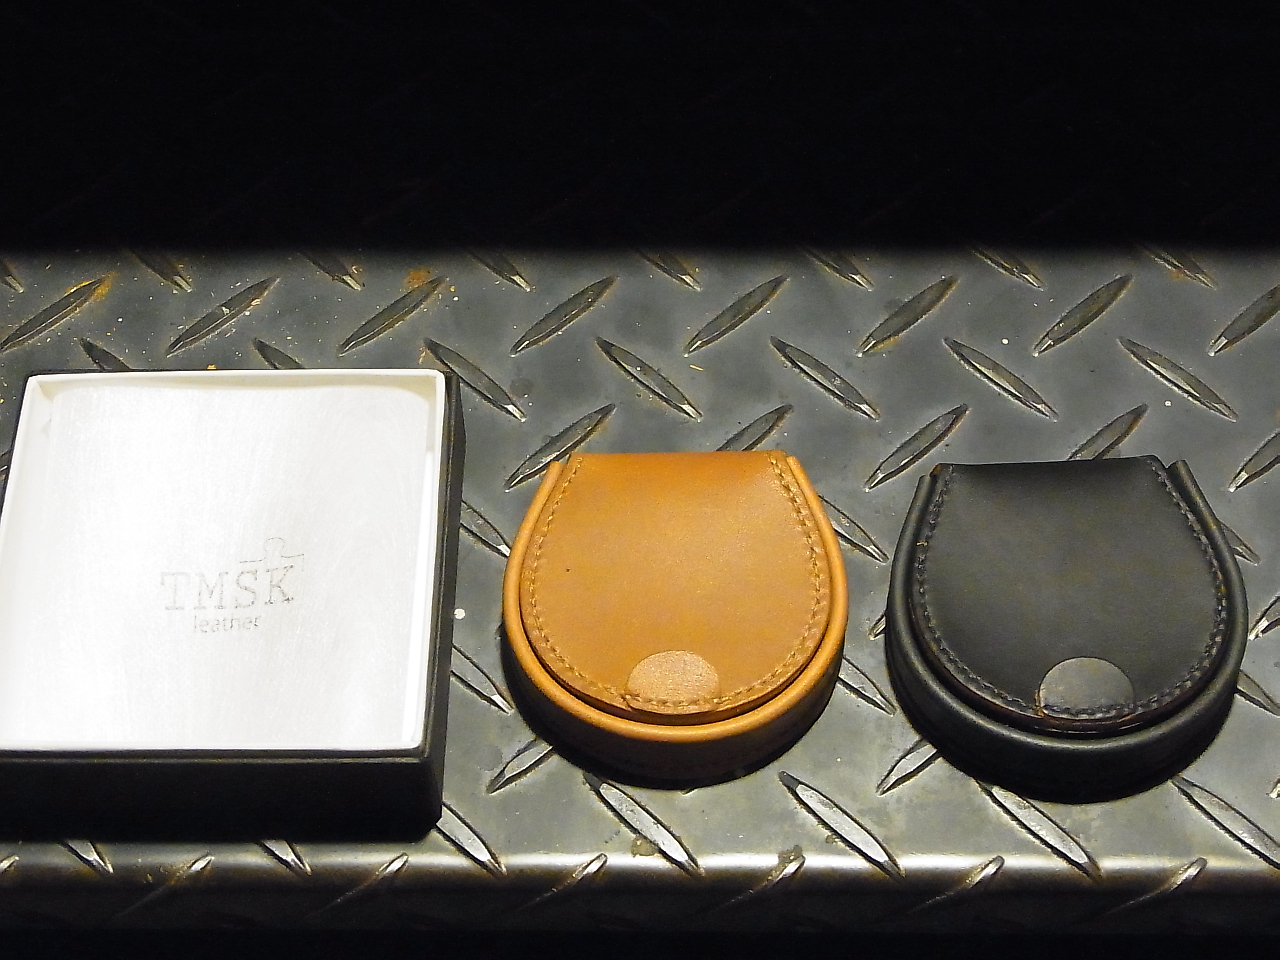 tmsk-leather-coincase-20151118-2